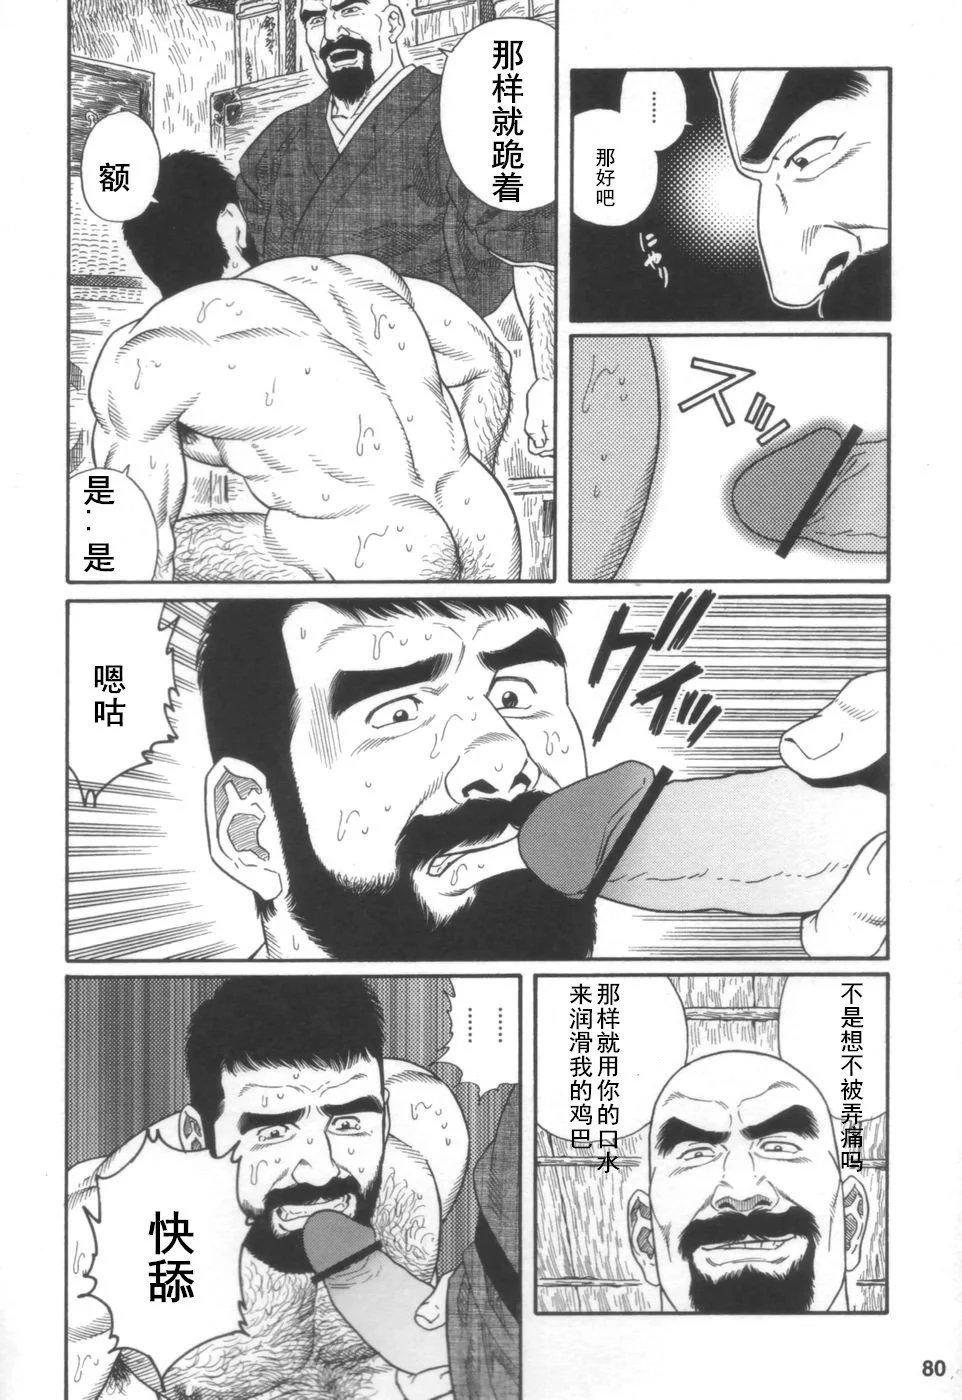 Kinky Gedou no Ie Joukan | 邪道之家 Vol. 1 Ch.3 Gozada - Page 6